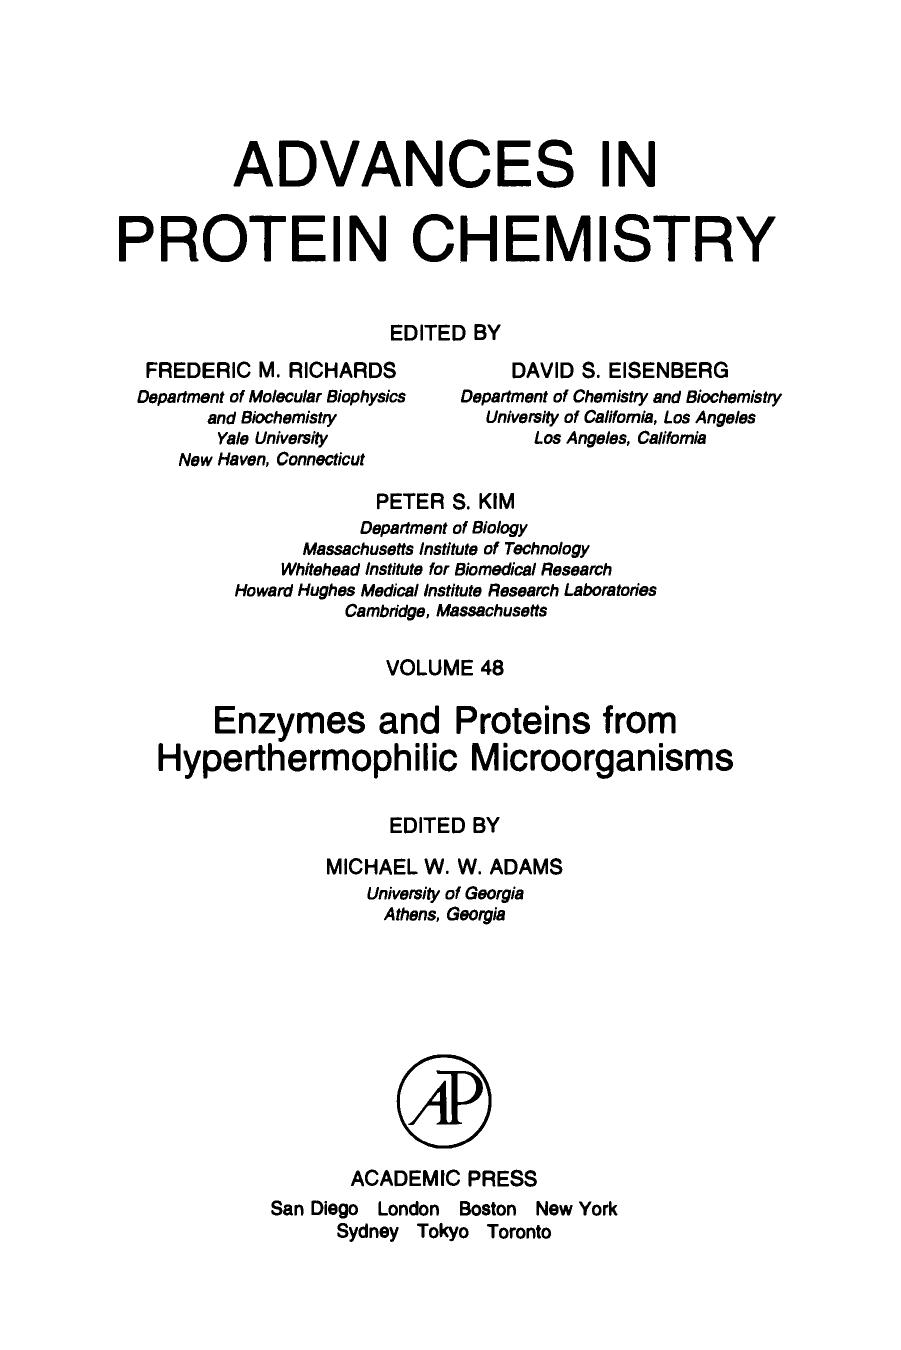 Enzymes and Proteins from Hyperthermophilic Microorganisms 1996